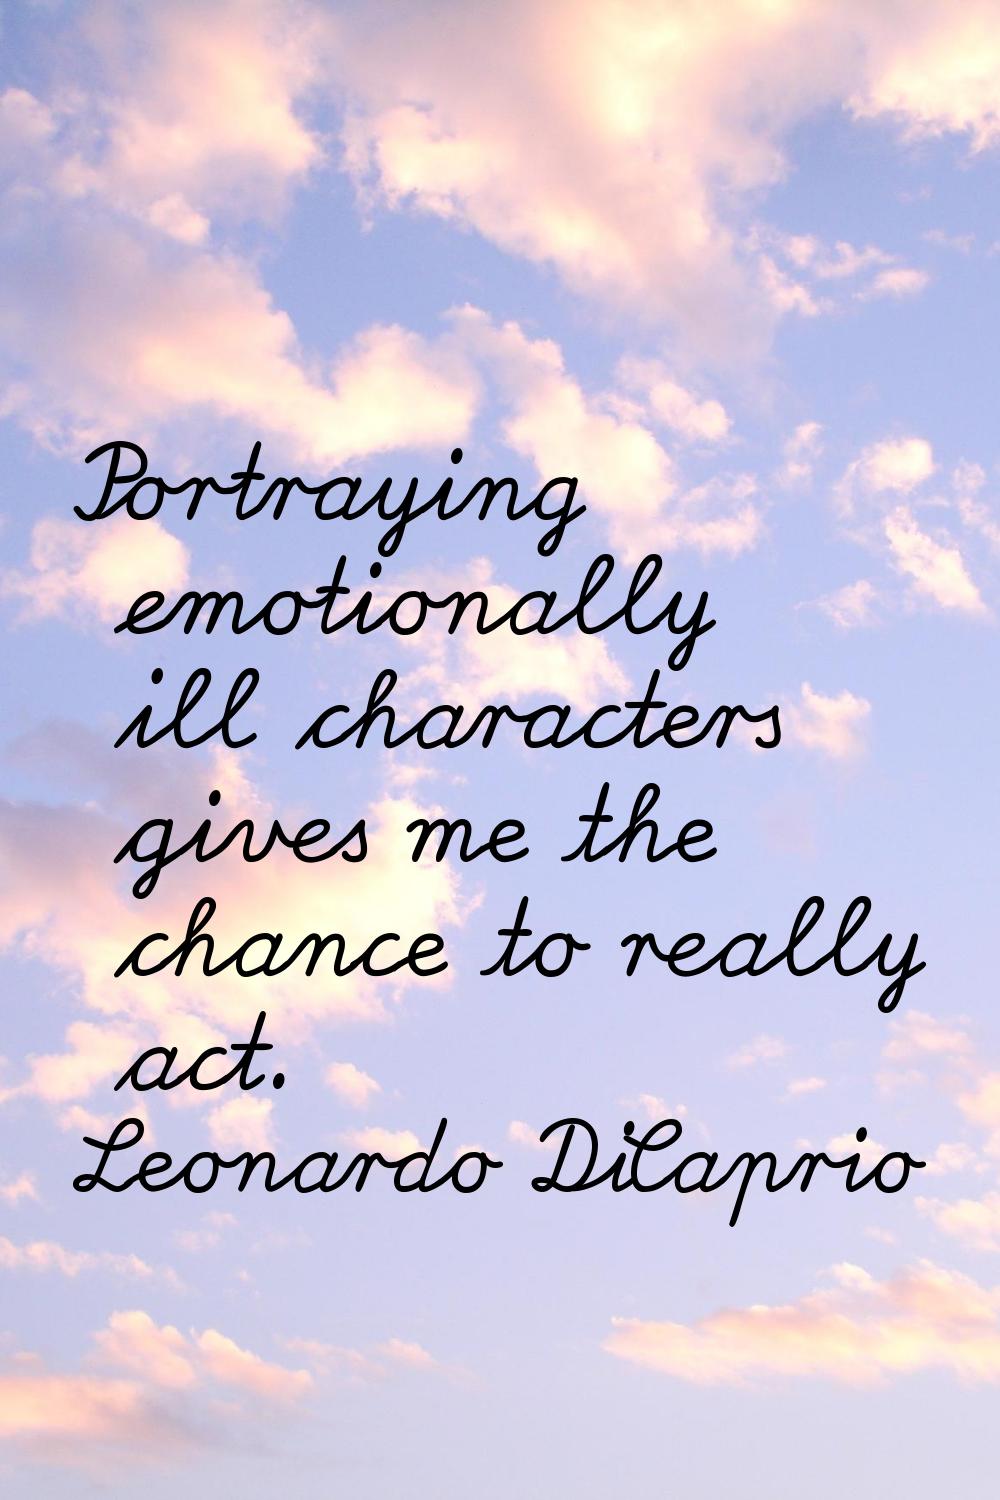 Portraying emotionally ill characters gives me the chance to really act.